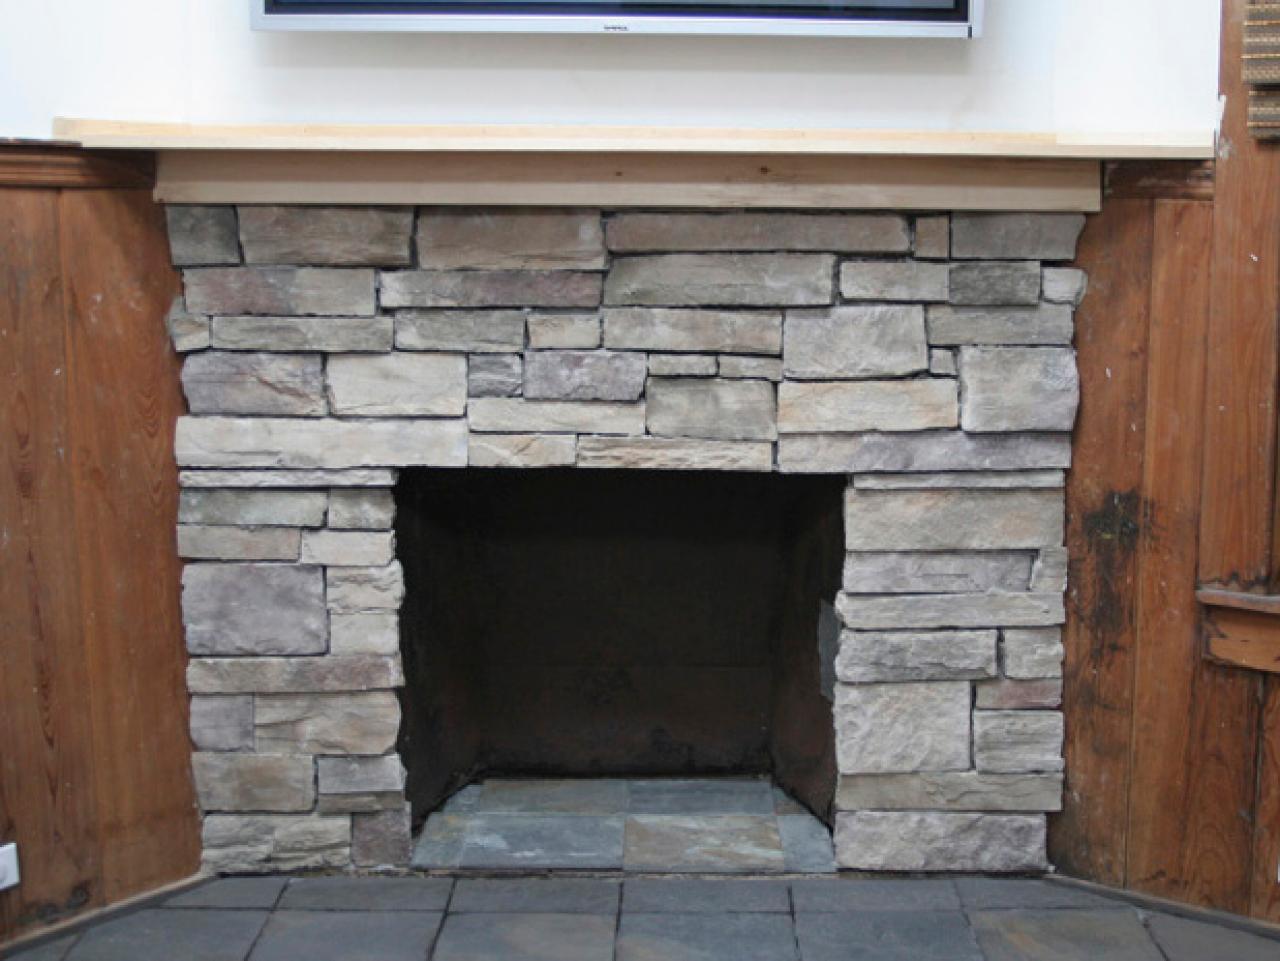 Cover A Brick Fireplace With Stone, How To Install Natural Stone Over Brick Fireplace